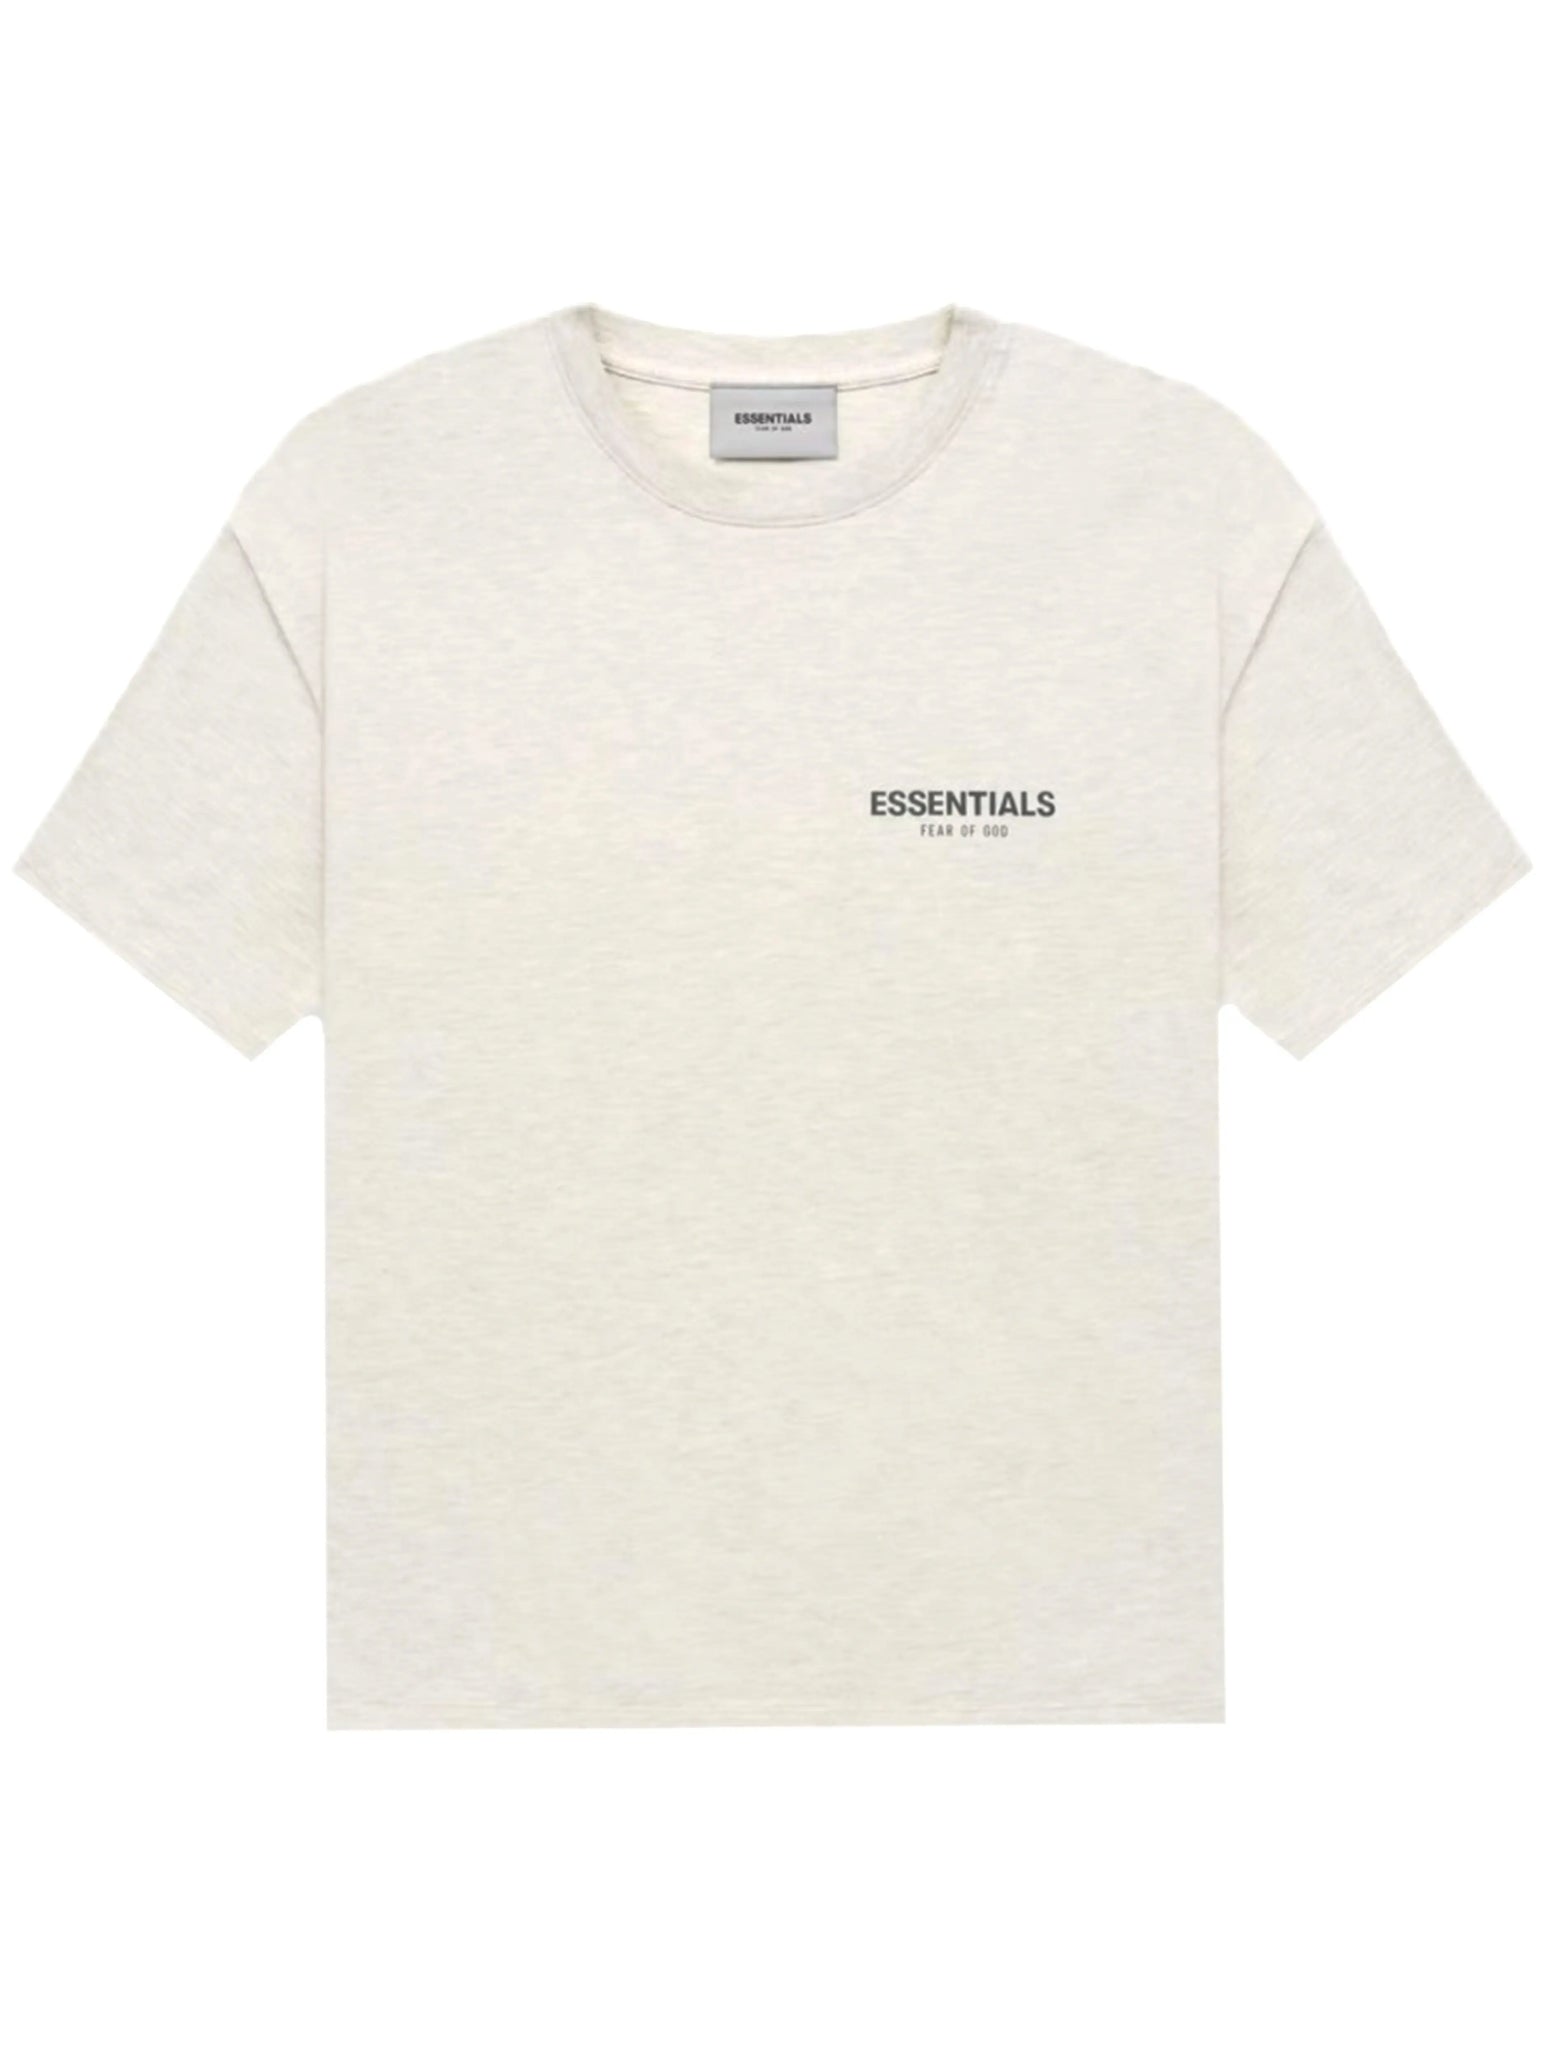 Fear of God Essentials Core Collection T-shirt Light Heather Oatmeal [FW21] Prior